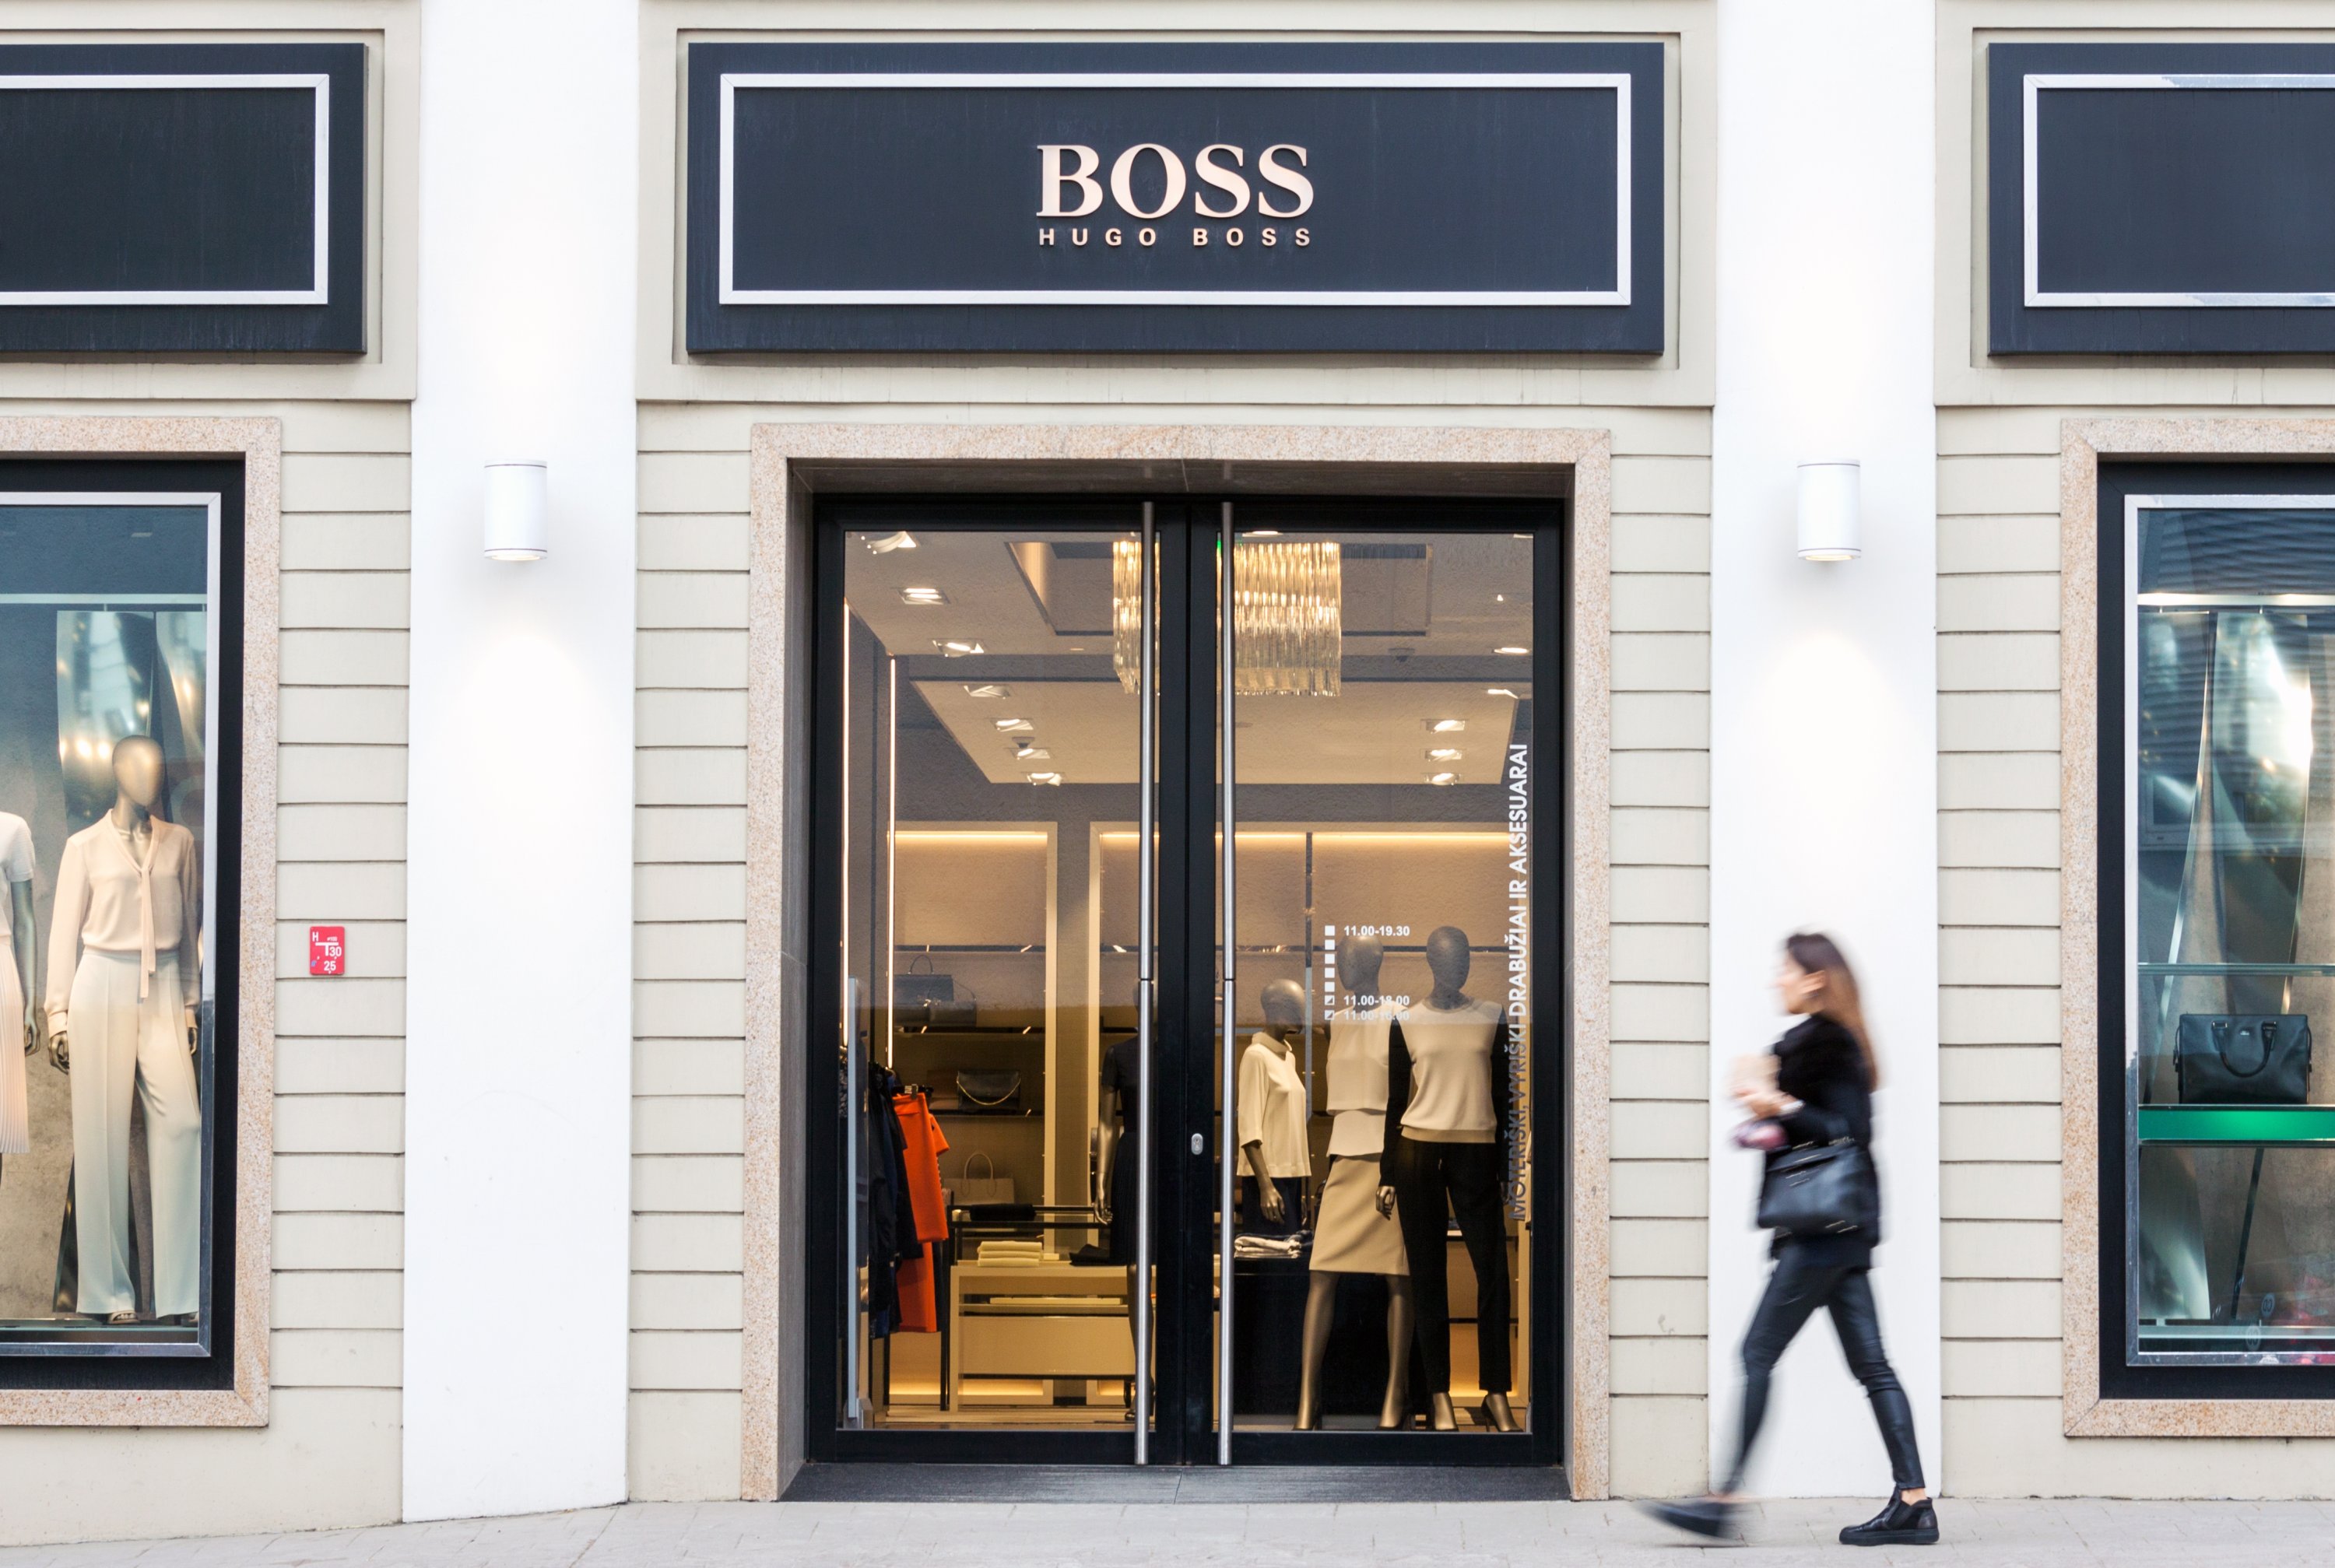 verdund stap Uitgang Hugo Boss to add 1,000 jobs in Turkey amid supply chain overhaul | Daily  Sabah